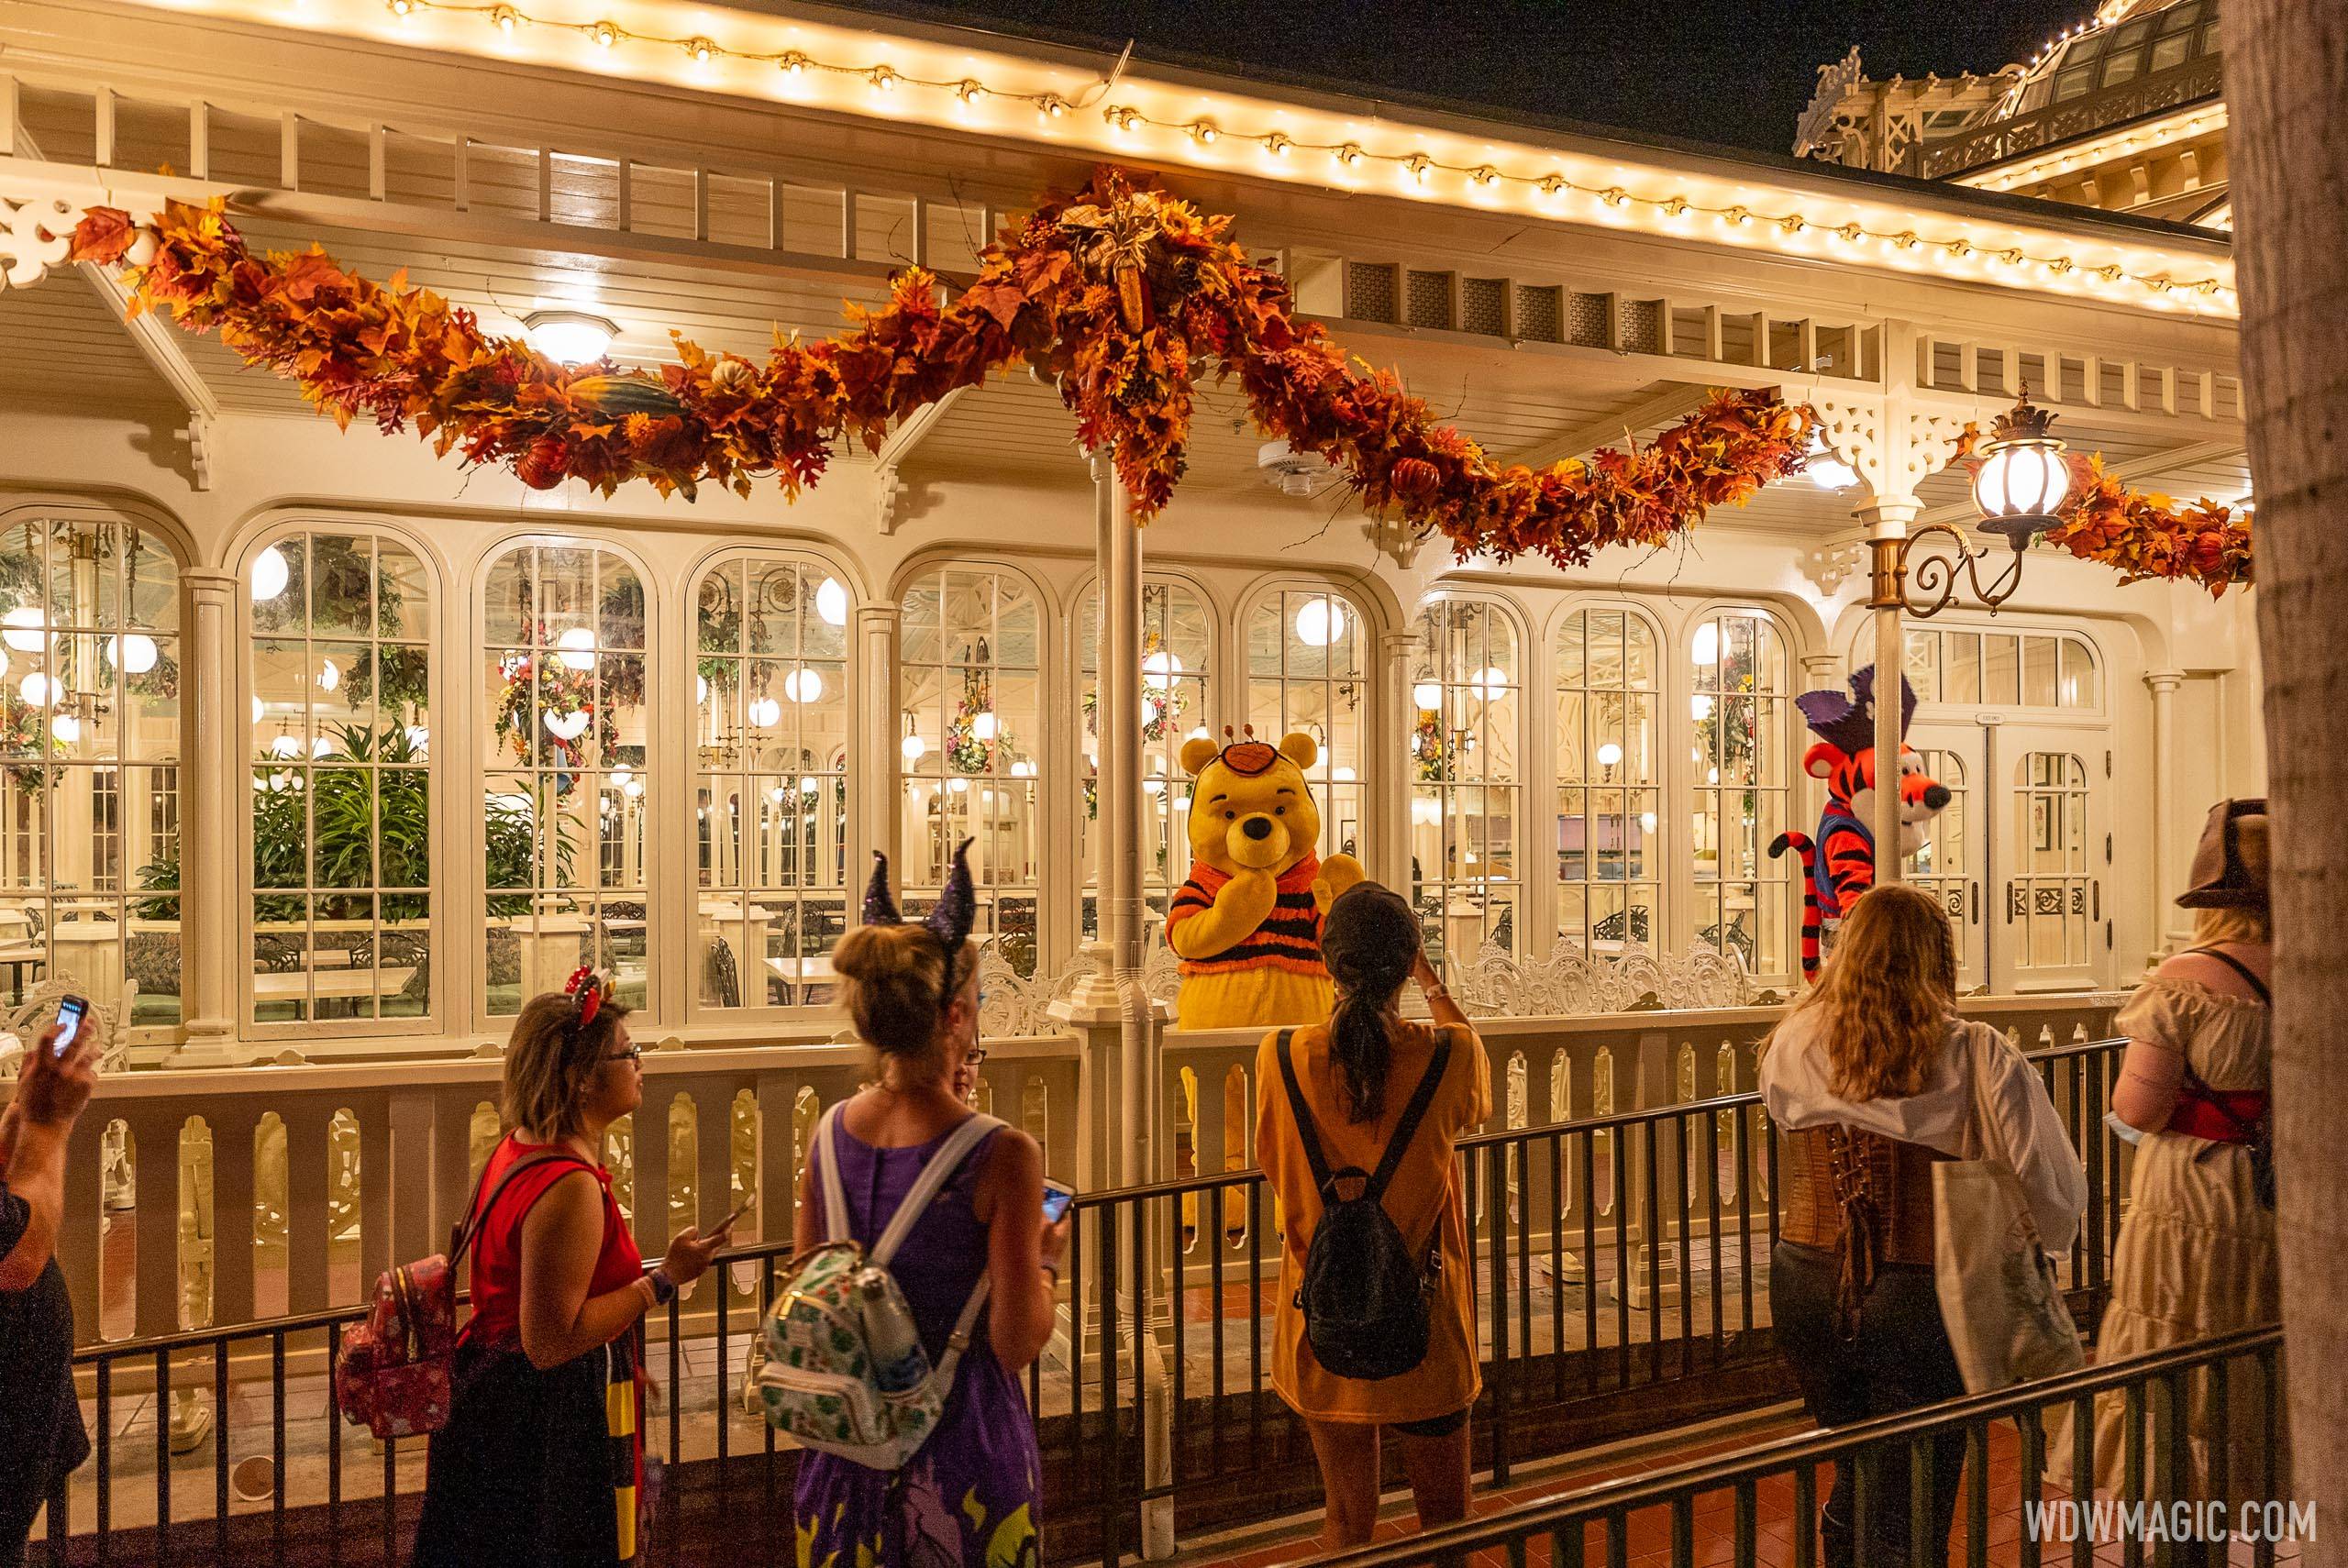 Winnie the Pooh, Piglet, Tigger and Eeyore distanced meet and greet at Disney After Hours BOO BASH